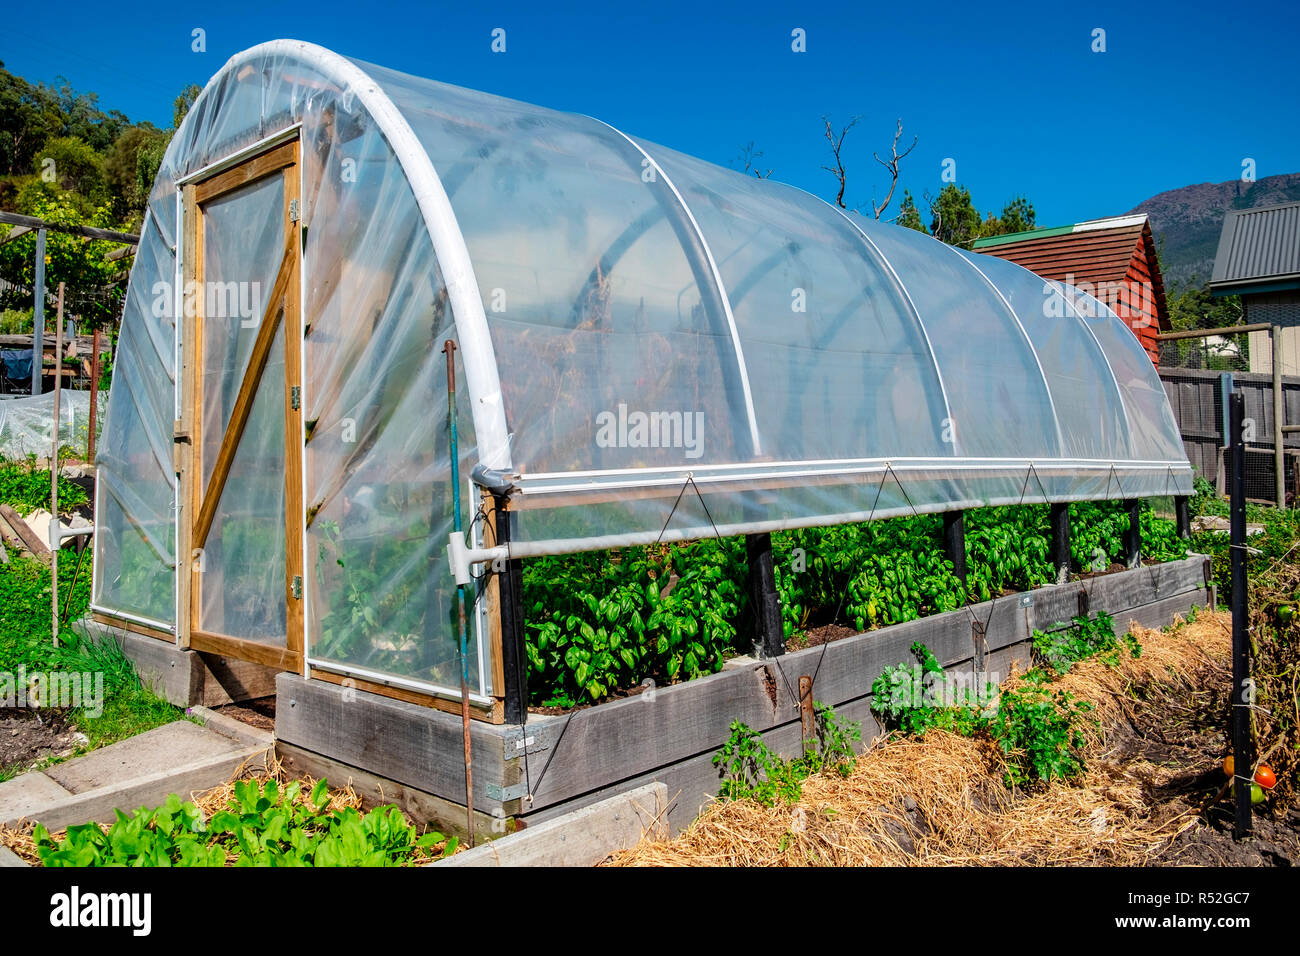 An agricultural hot house hoop tunnel built from recycled fish farm tubing, with adjustable roll up side flaps to allow air flow for ventilation. Stock Photo